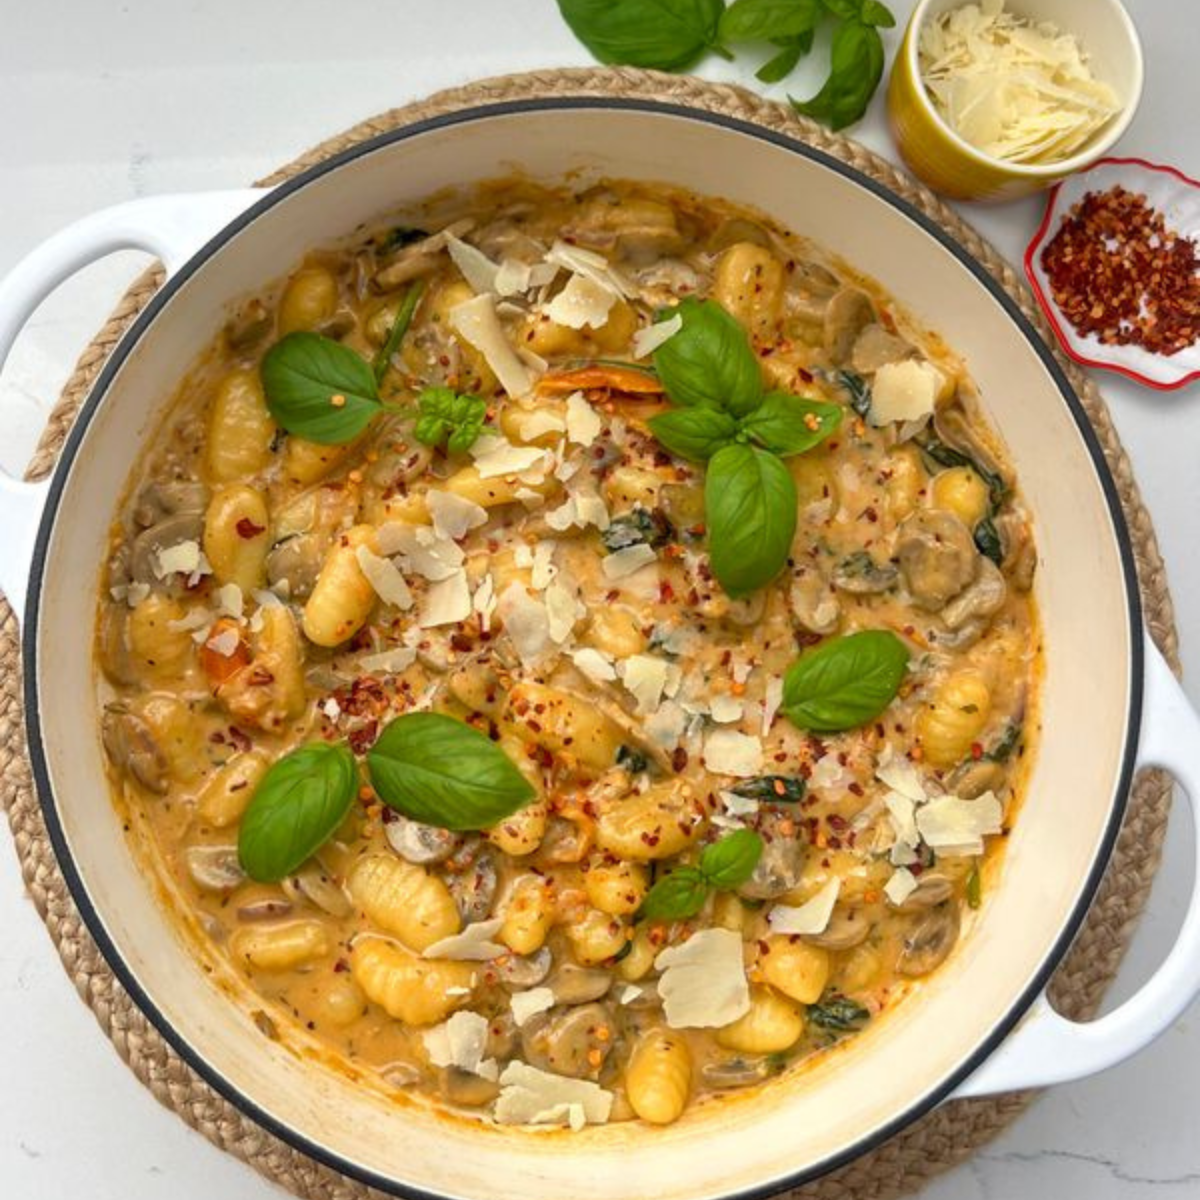 {"Text":"","URL":"https://www.chirnsidepark.com.au/the-chirnside-park-collective/the-food-diary/2024/one-pot-marry-me-mushroom-gnocchi","OpenNewWindow":false}